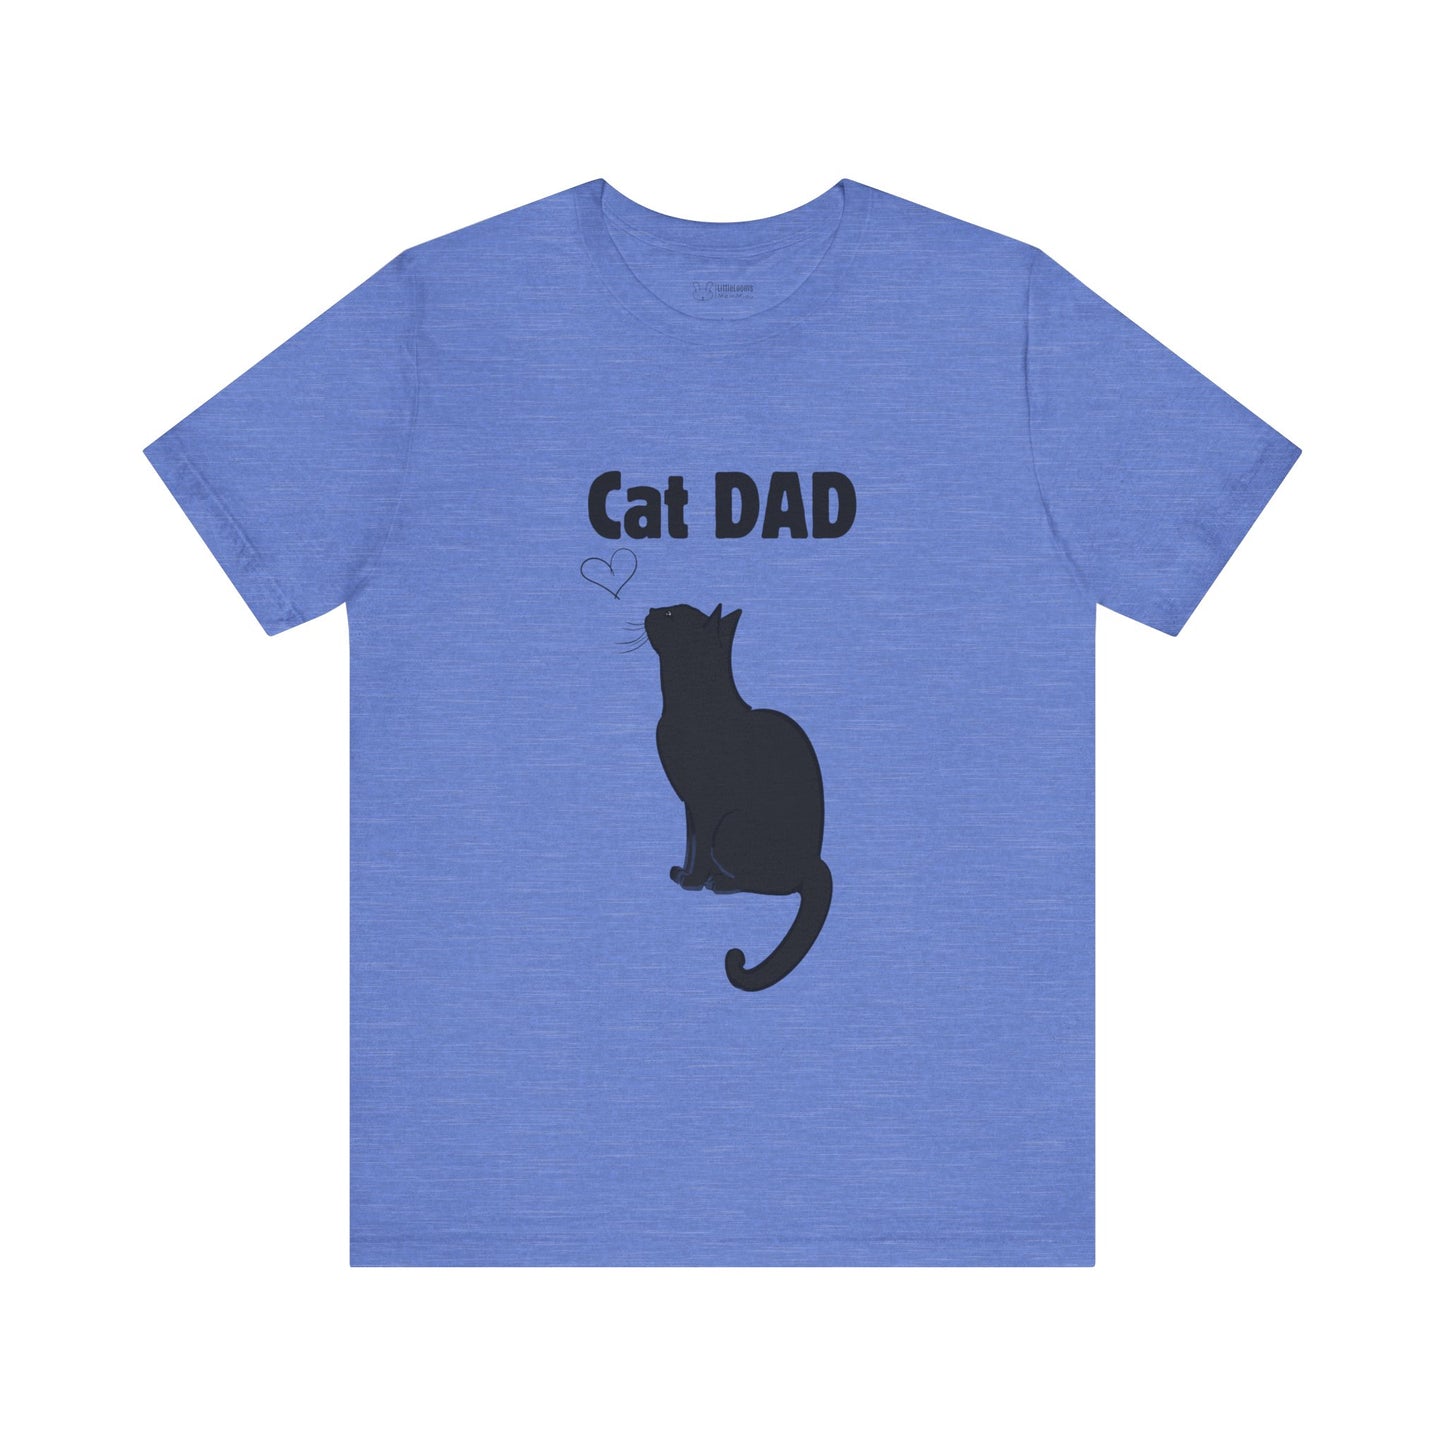 Short sleeve t-shirt with cat design for dads